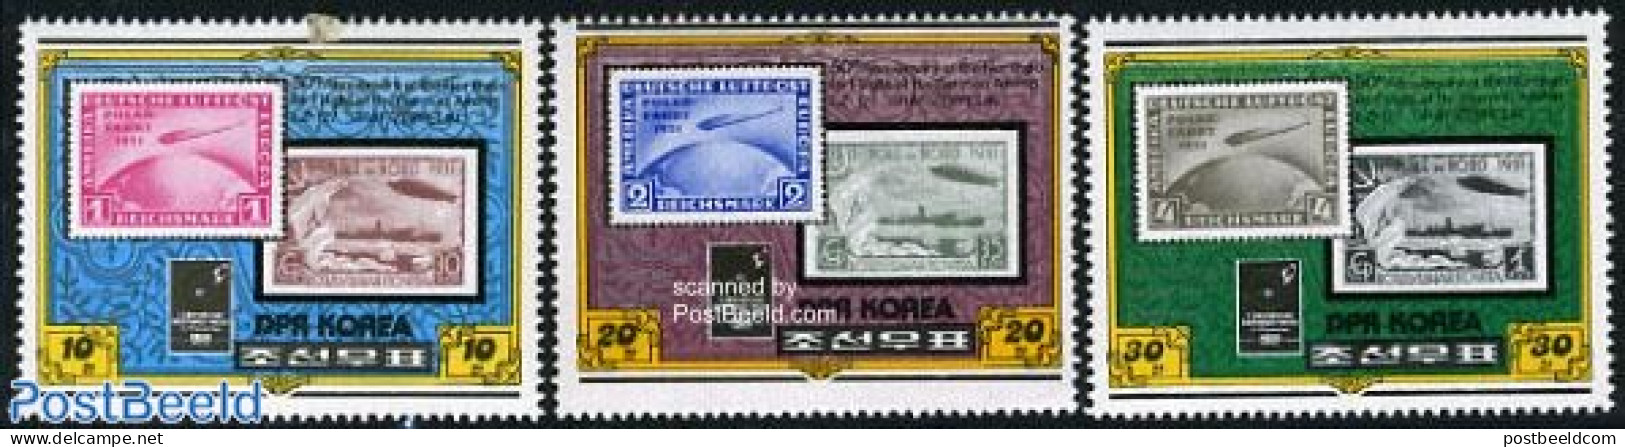 Korea, North 1980 Int. Stamp Fair Essen 3v, Mint NH, Transport - Stamps On Stamps - Ships And Boats - Zeppelins - Timbres Sur Timbres